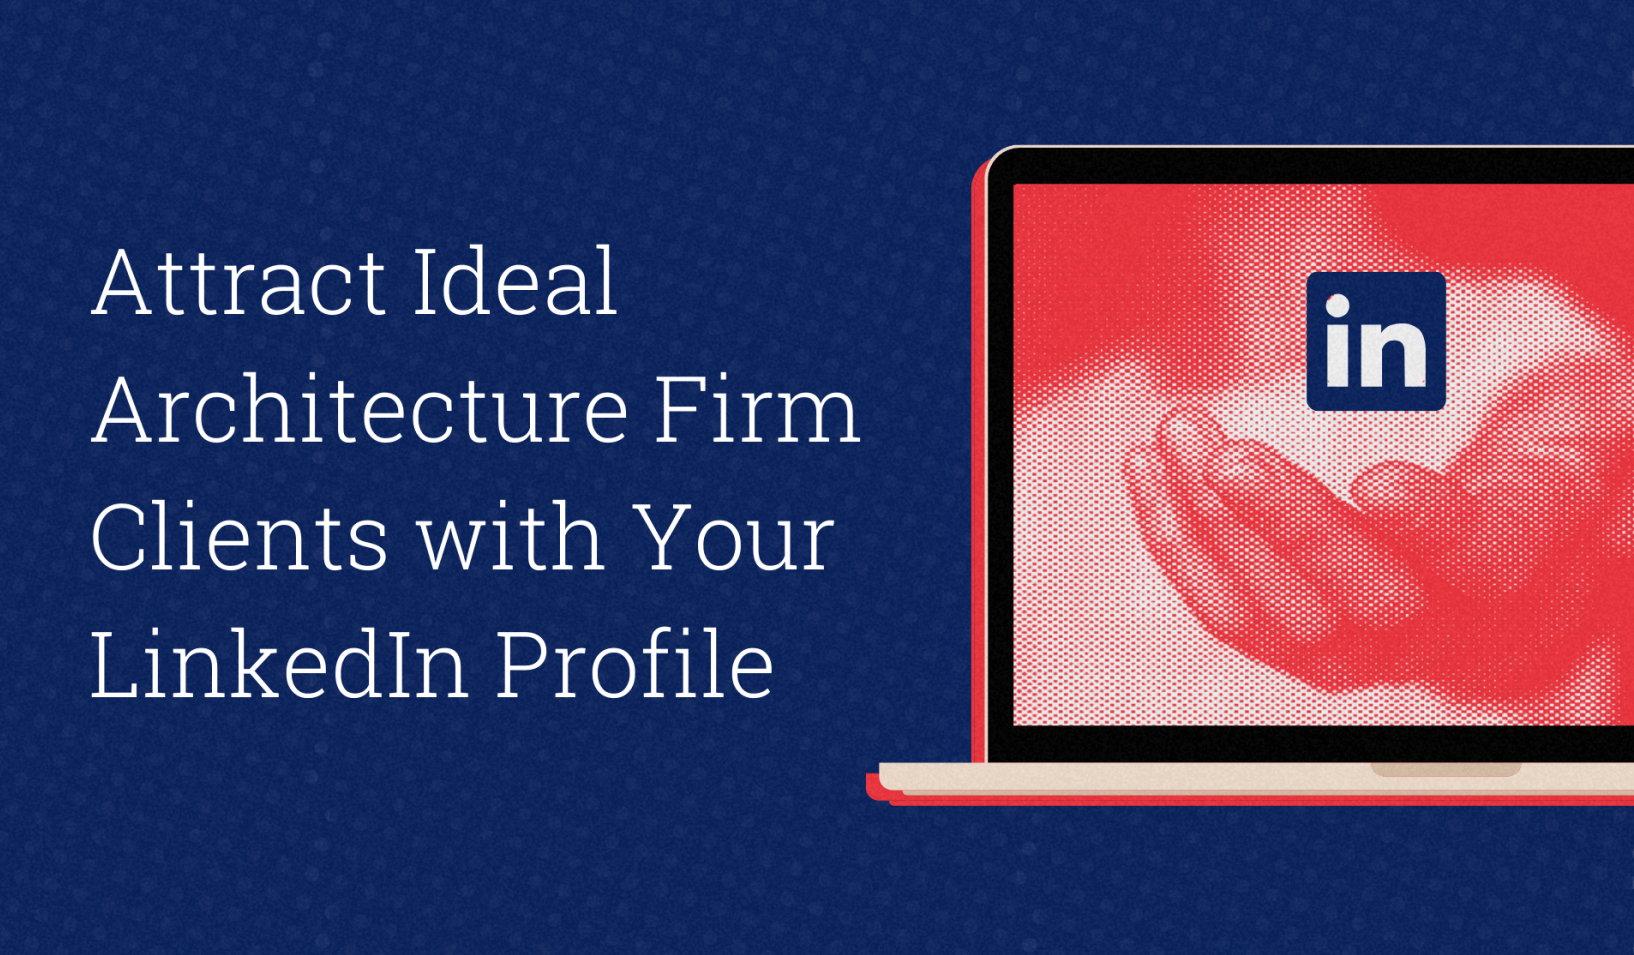 image of a laptop screen with a hand and the LinkedIn logo above it, and the headline: Attract Ideal Architecture  Firm Clients with Your LinkedIn Profile